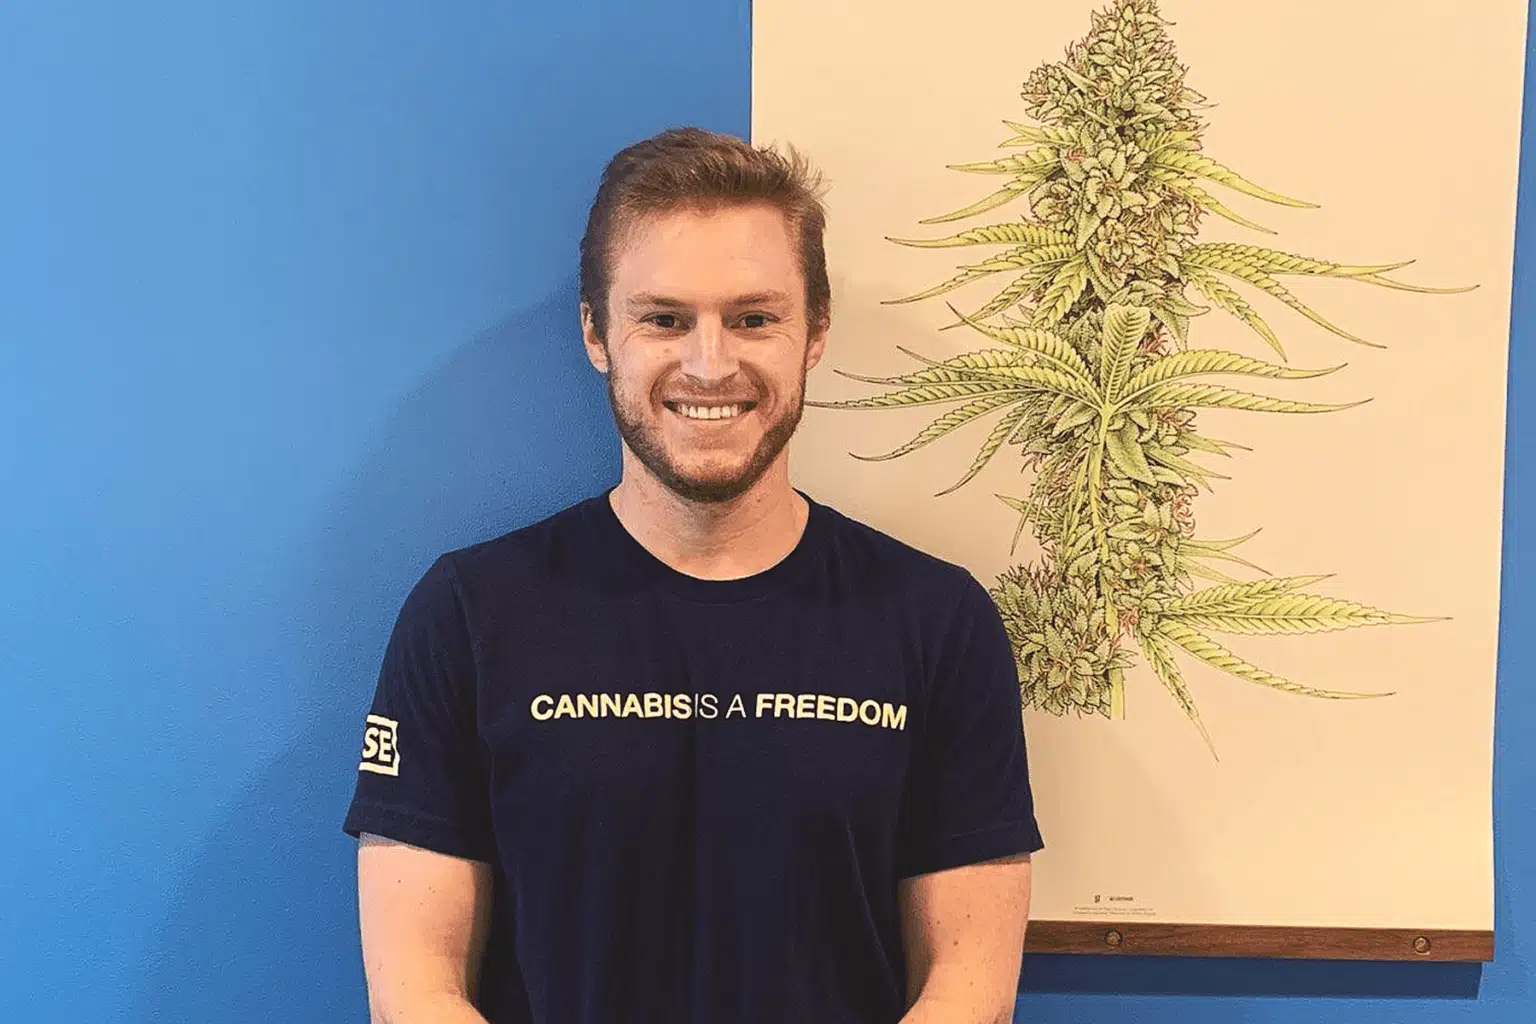 Silas Wonderling, PharmD, a pharmacist and general manager of the RISE Dispensary in Monroeville, Pennsylvania